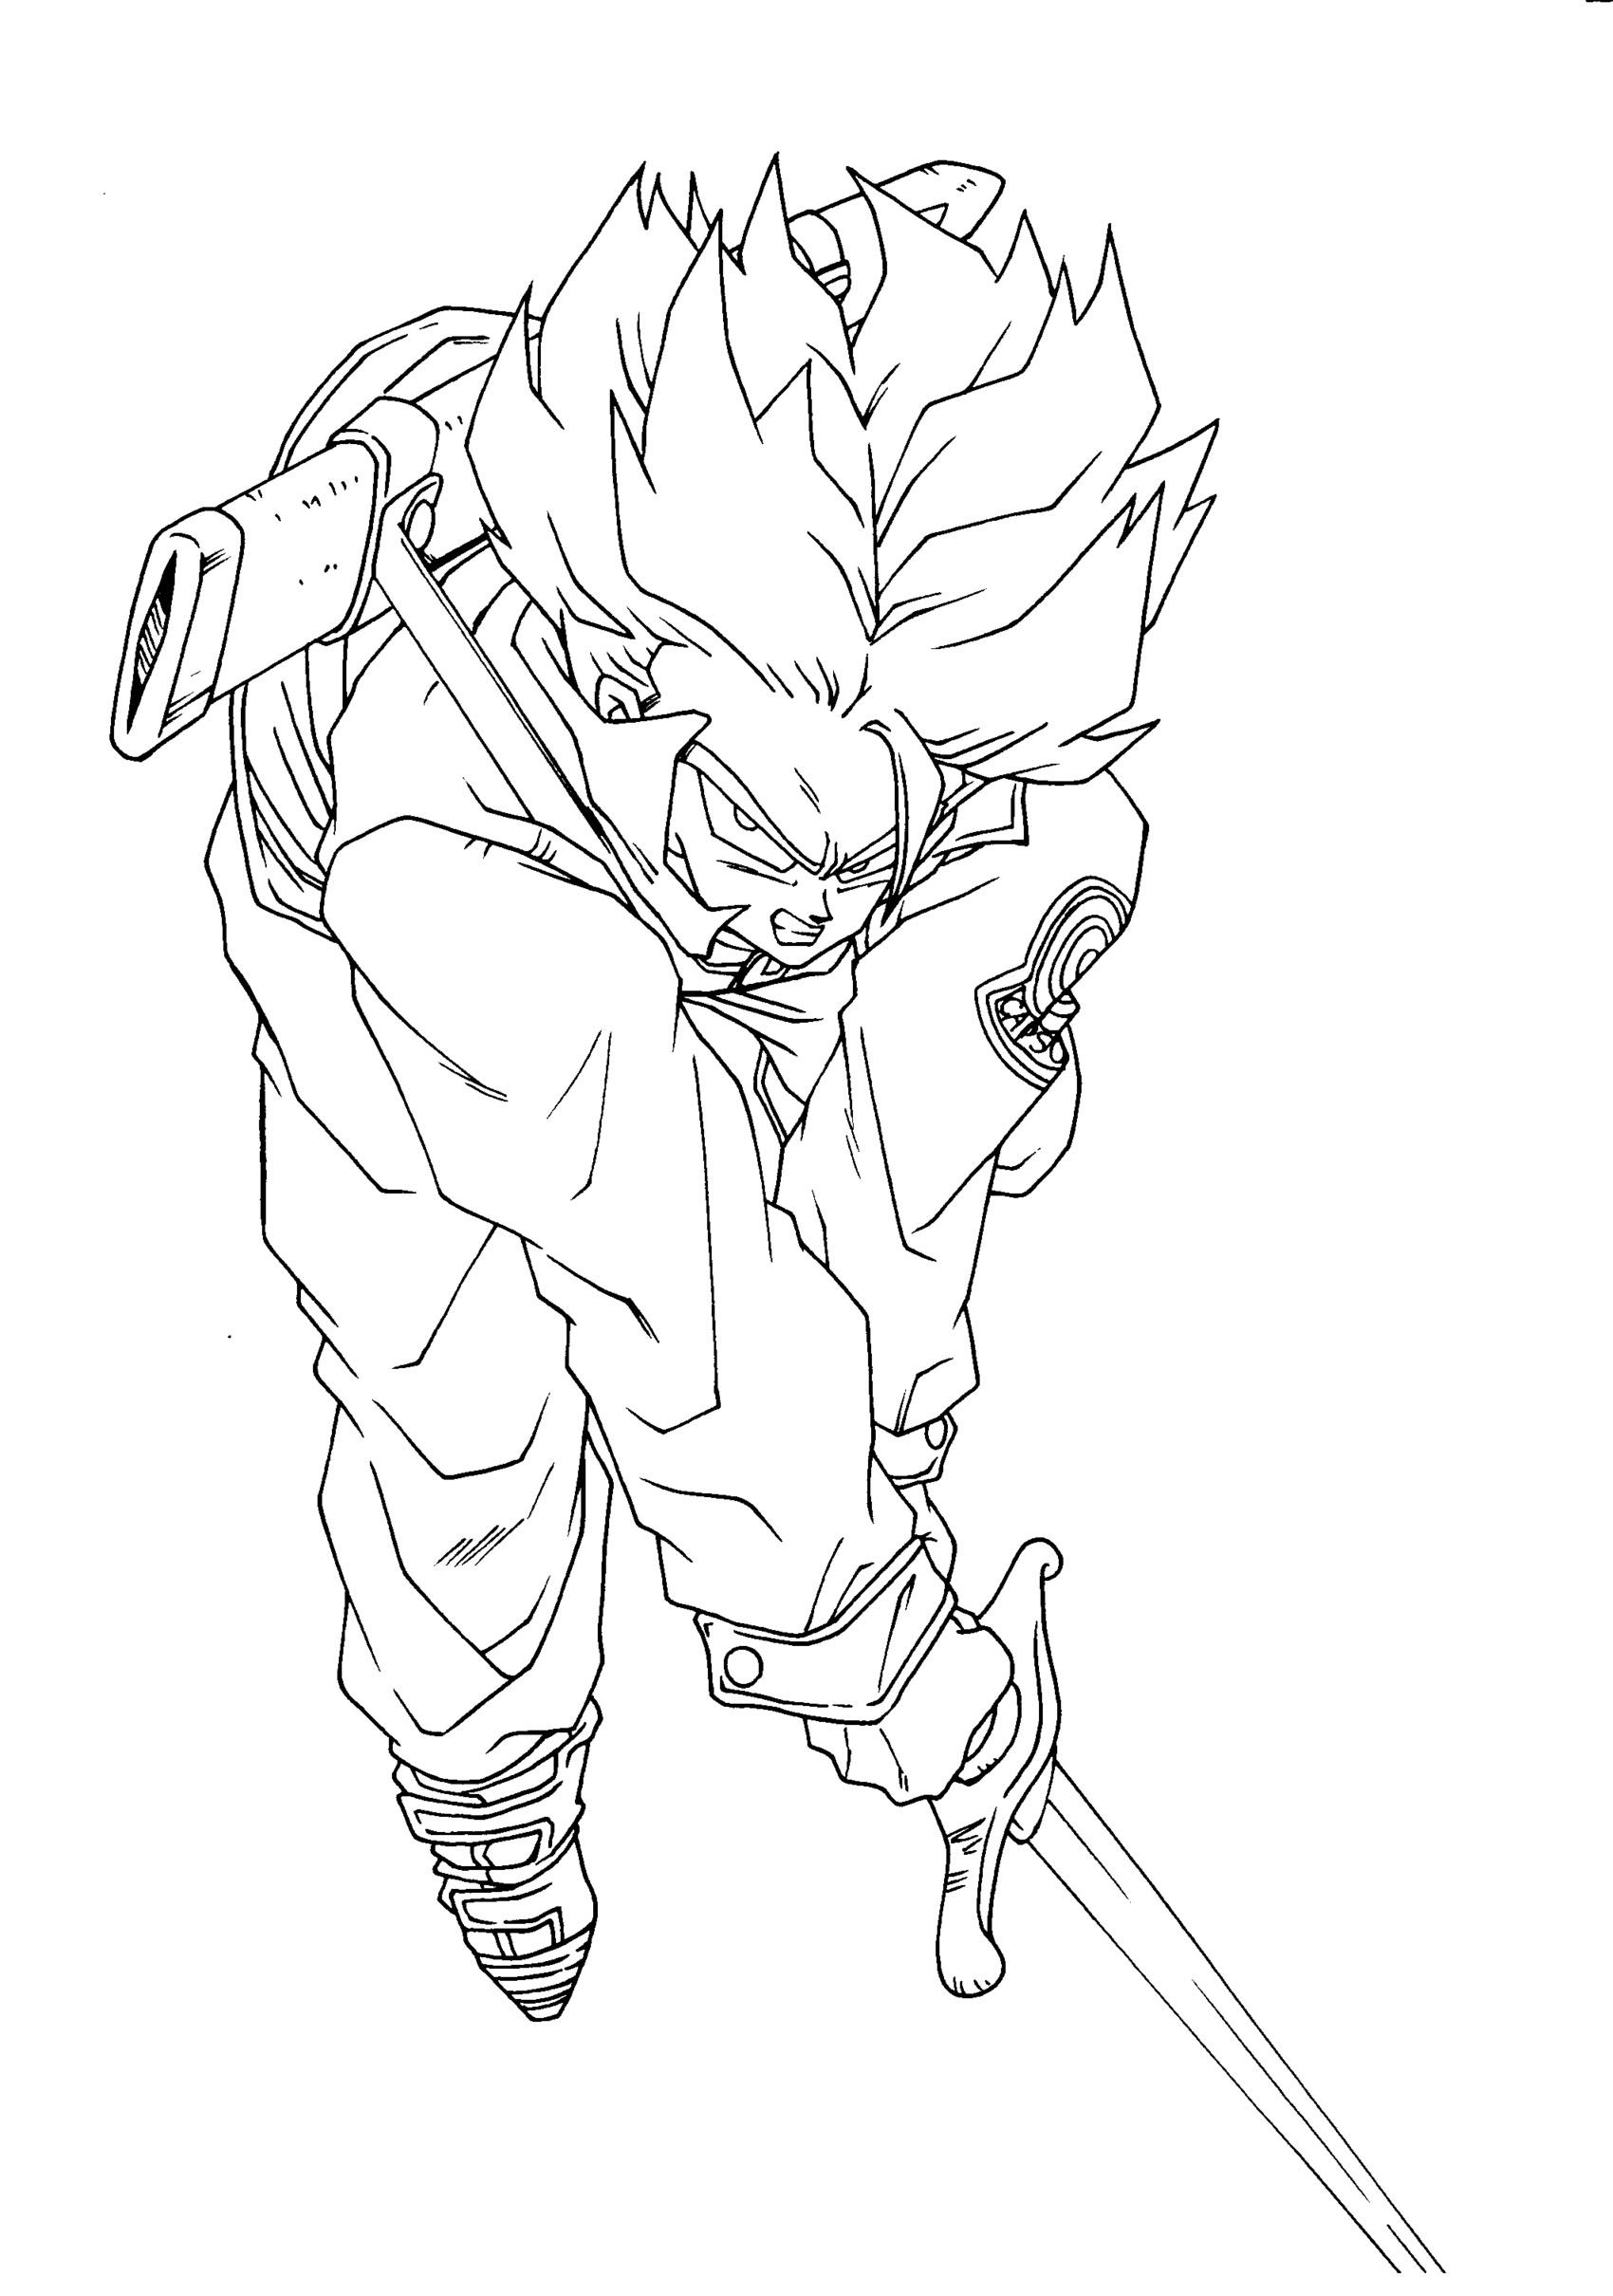 coloriages-dragon-ball-z-7